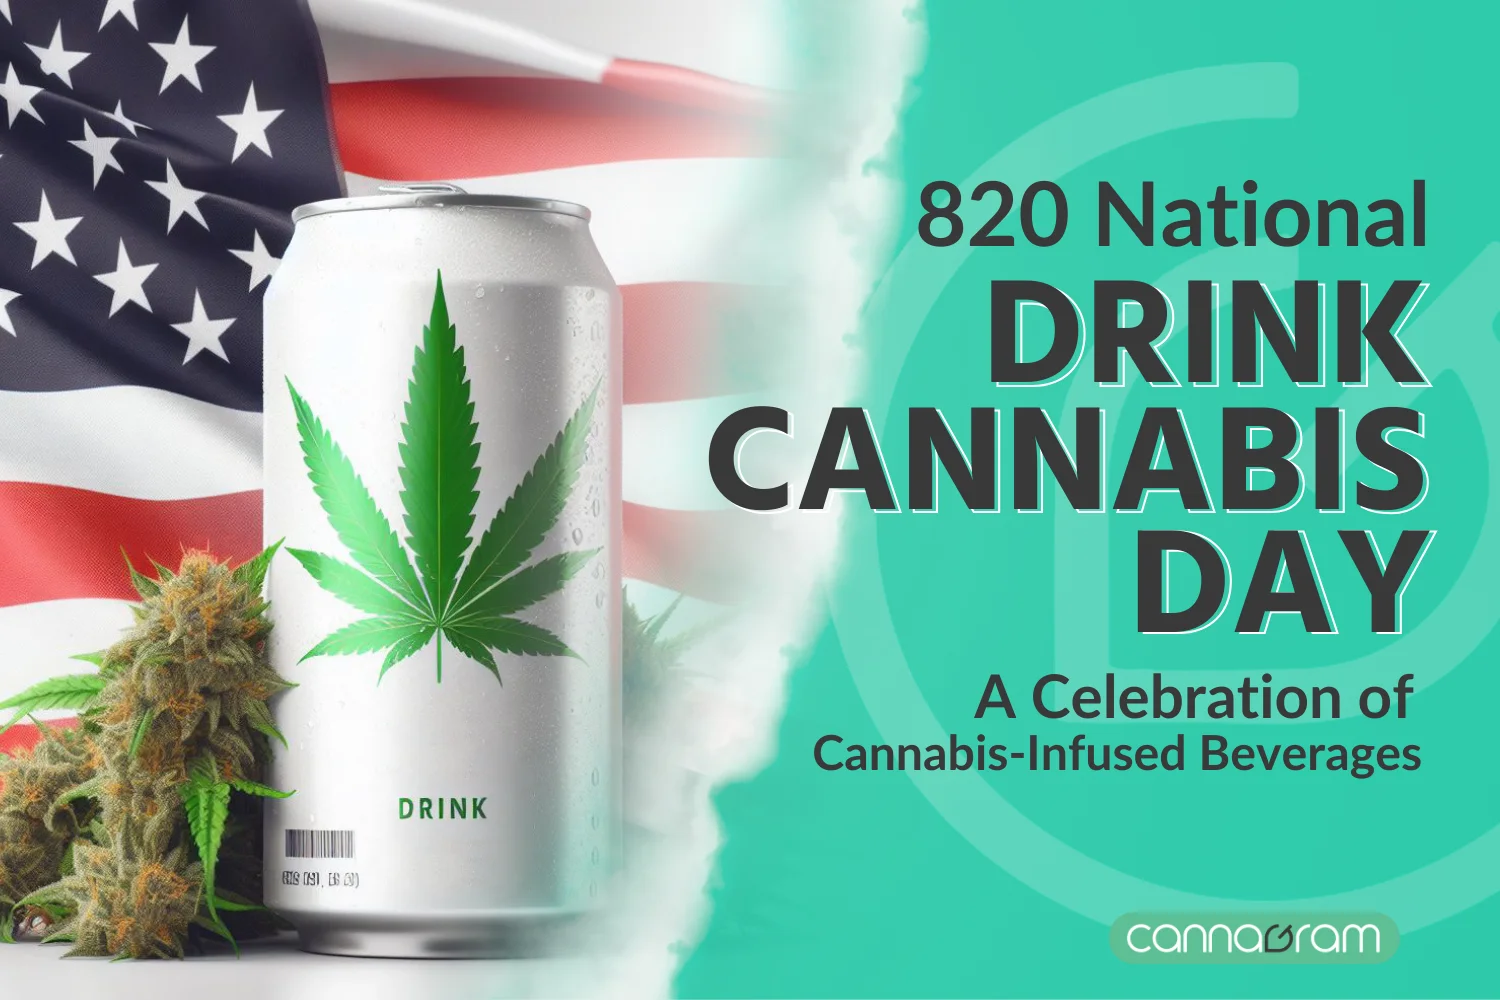 A cannabis-infused-drink-can-reminiscent-of-the-Cann-Drink-brand,-surrounded-by-marijuana-buds-and-featuring-the-United-States-flag-in-the-background.-It's-a -celebration-of-National-Cannabis-Drinking-Day-with-THC-drinks-CBD-drinks-and-more